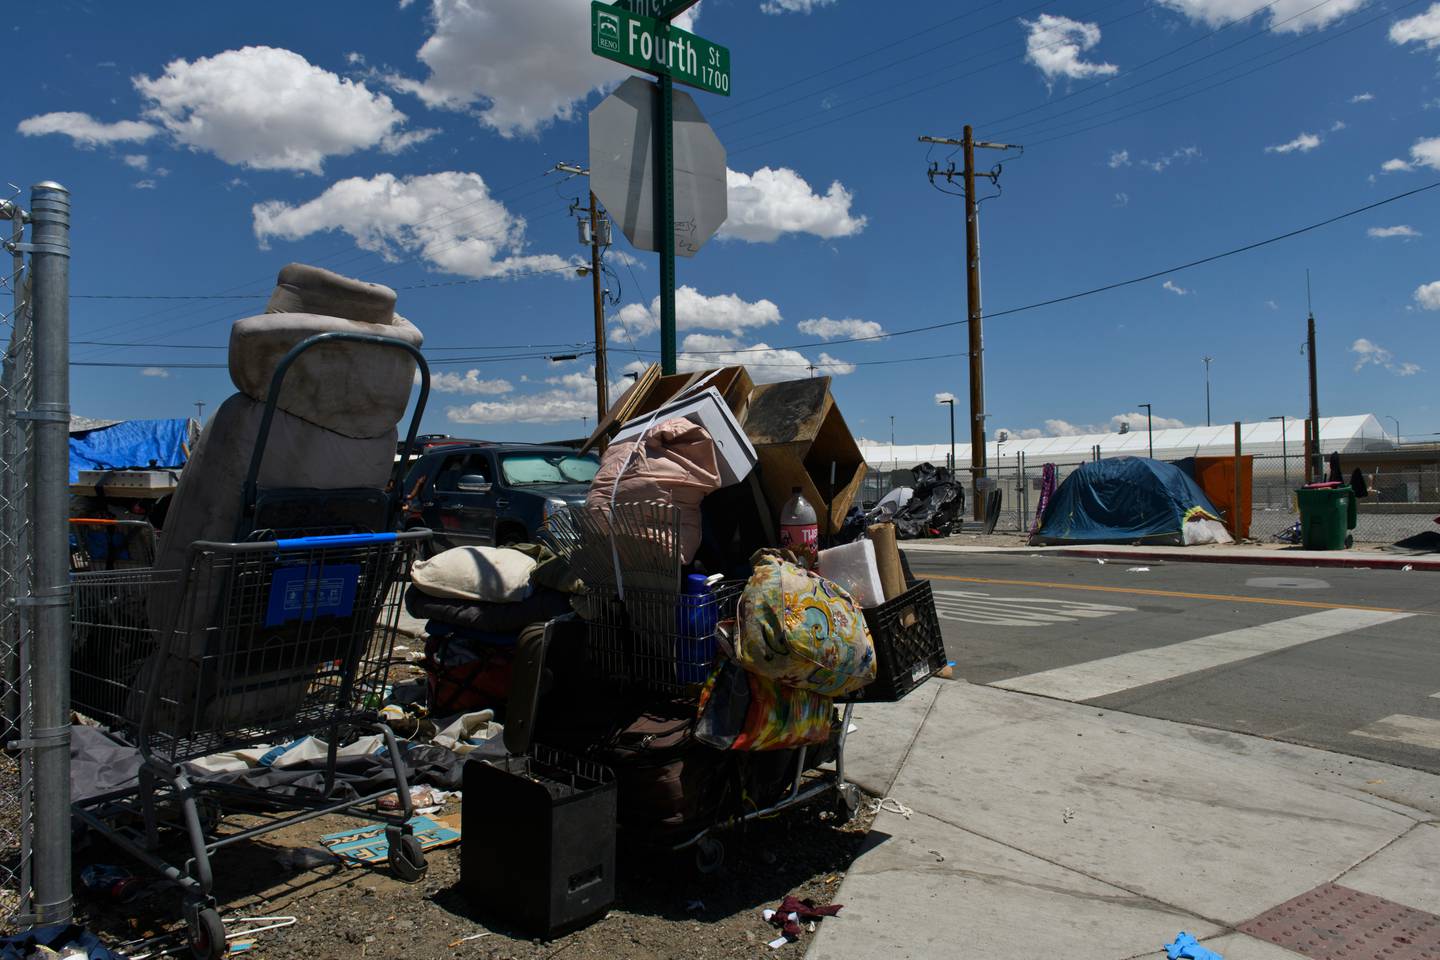 homeless, sprung structure, reno, nevada cares campus